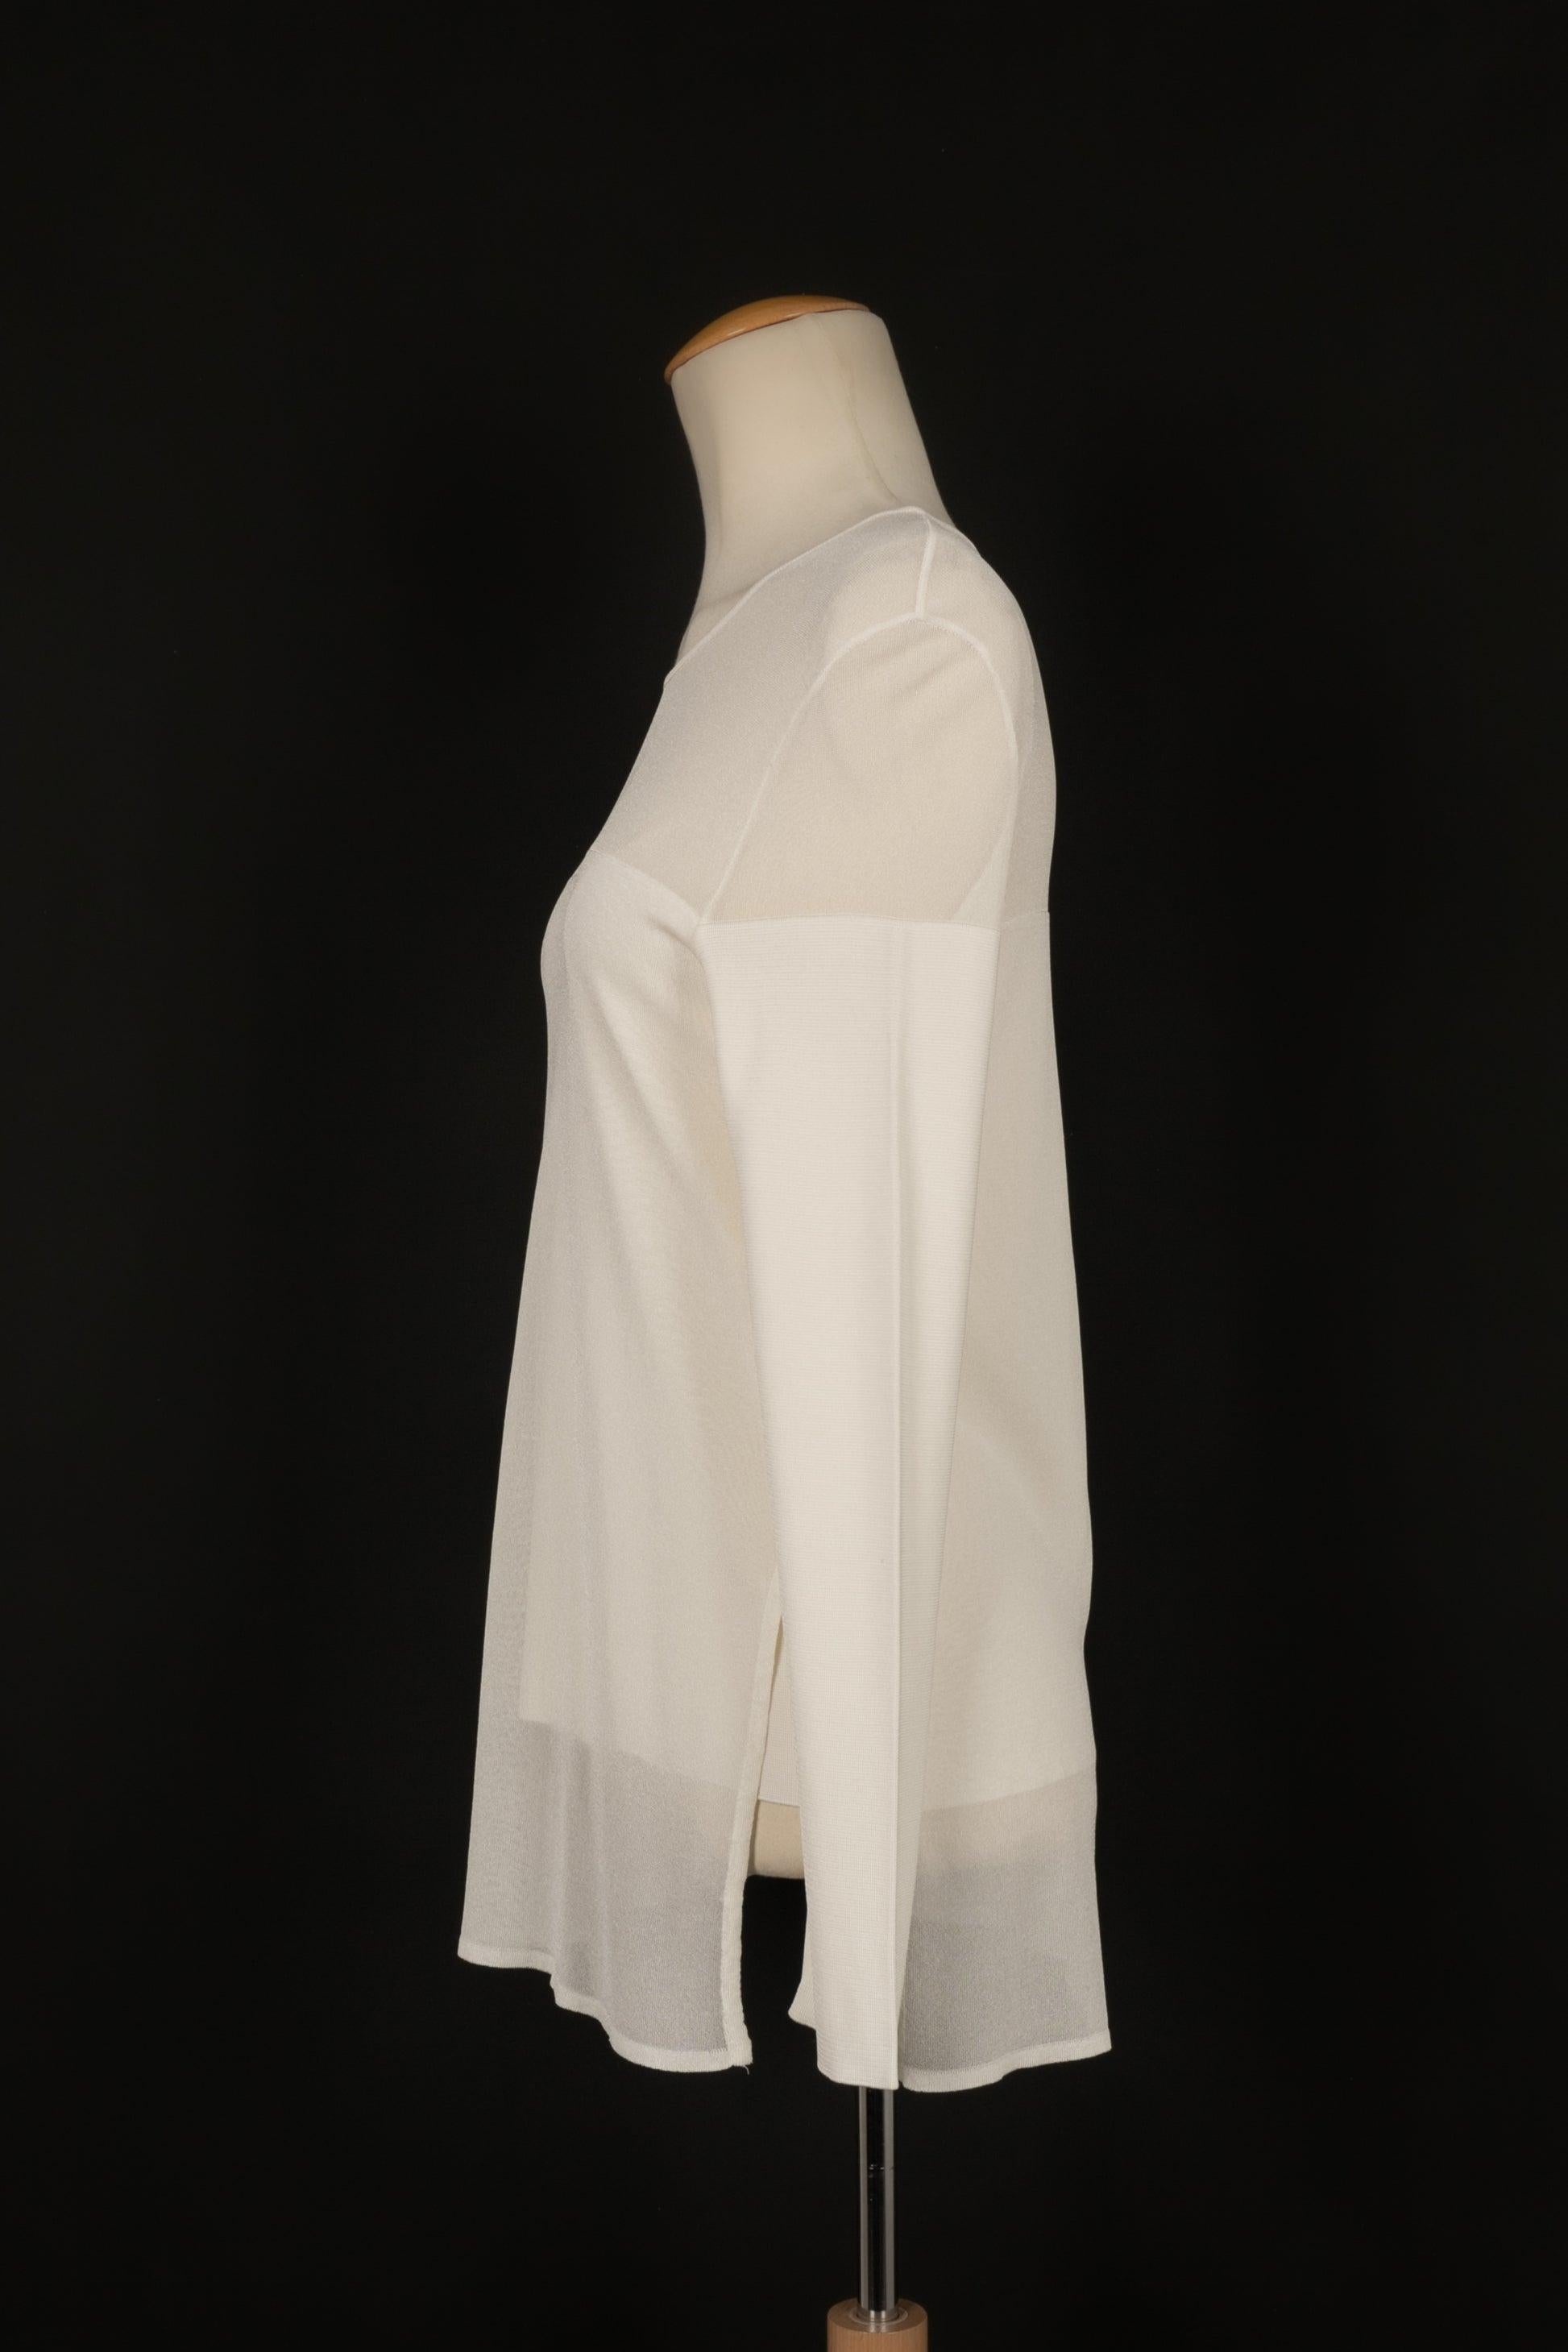 Dior - (Made in Italy) White mesh longsleeved top. No size indicated, it fits a 38FR.

Additional information:
Condition: Very good condition
Dimensions: Shoulder width: 42 cm
Chest: 40 cm
Sleeve length: 61 cm
Length: 72 cm

Seller reference: FH151